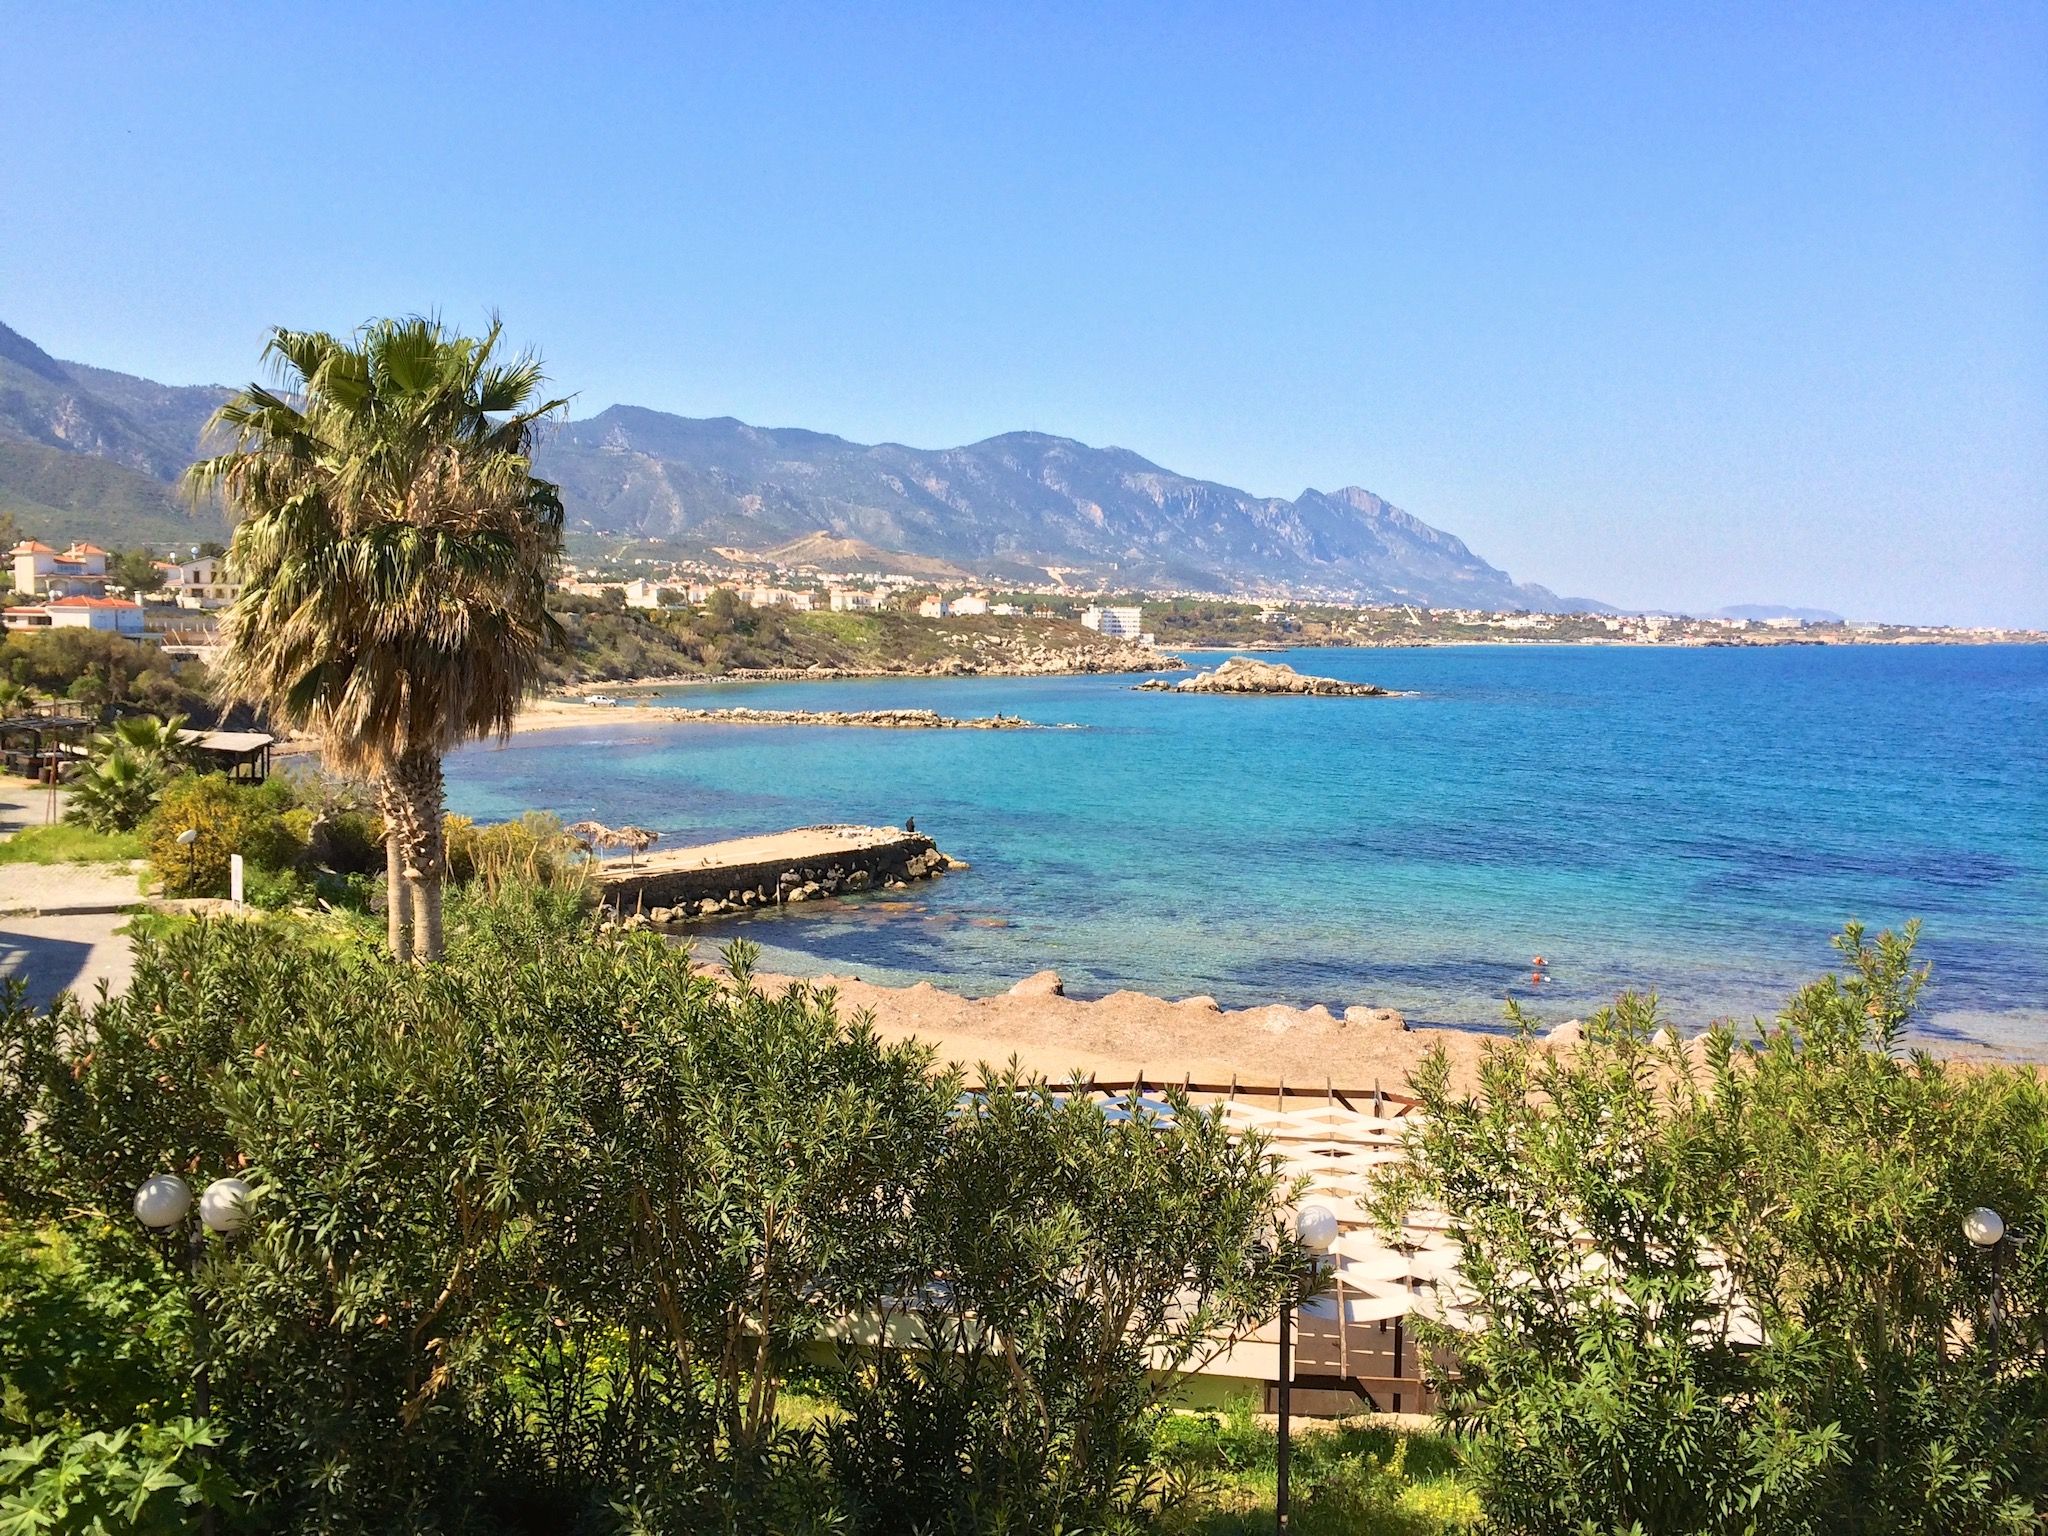 Olive groves and a Mediterranean landscape to dream of: Cyprus in spring is simply wonderful. Diving holidays in Cyprus: The landscape of the island is a dream and can also be seen under water! Pictured: Kyrenia in the north of the island. Photo: Sascha Tegtmeyer